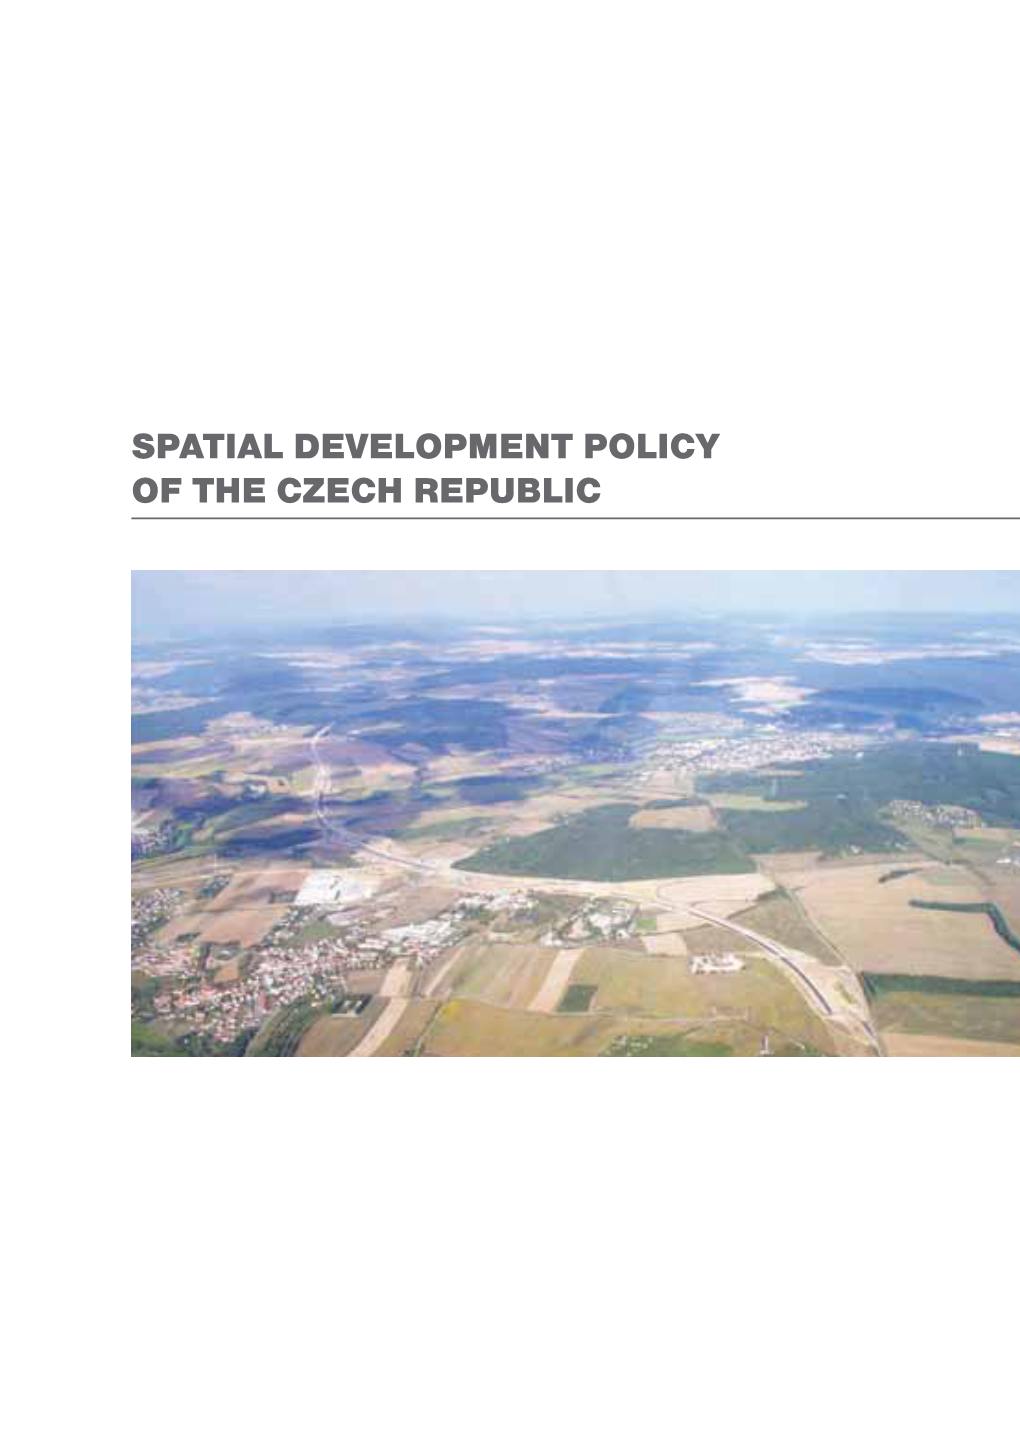 SPATIAL DEVELOPMENT POLICY of the CZECH REPUBLIC © Ministry for Regional Development of the Czech Republic